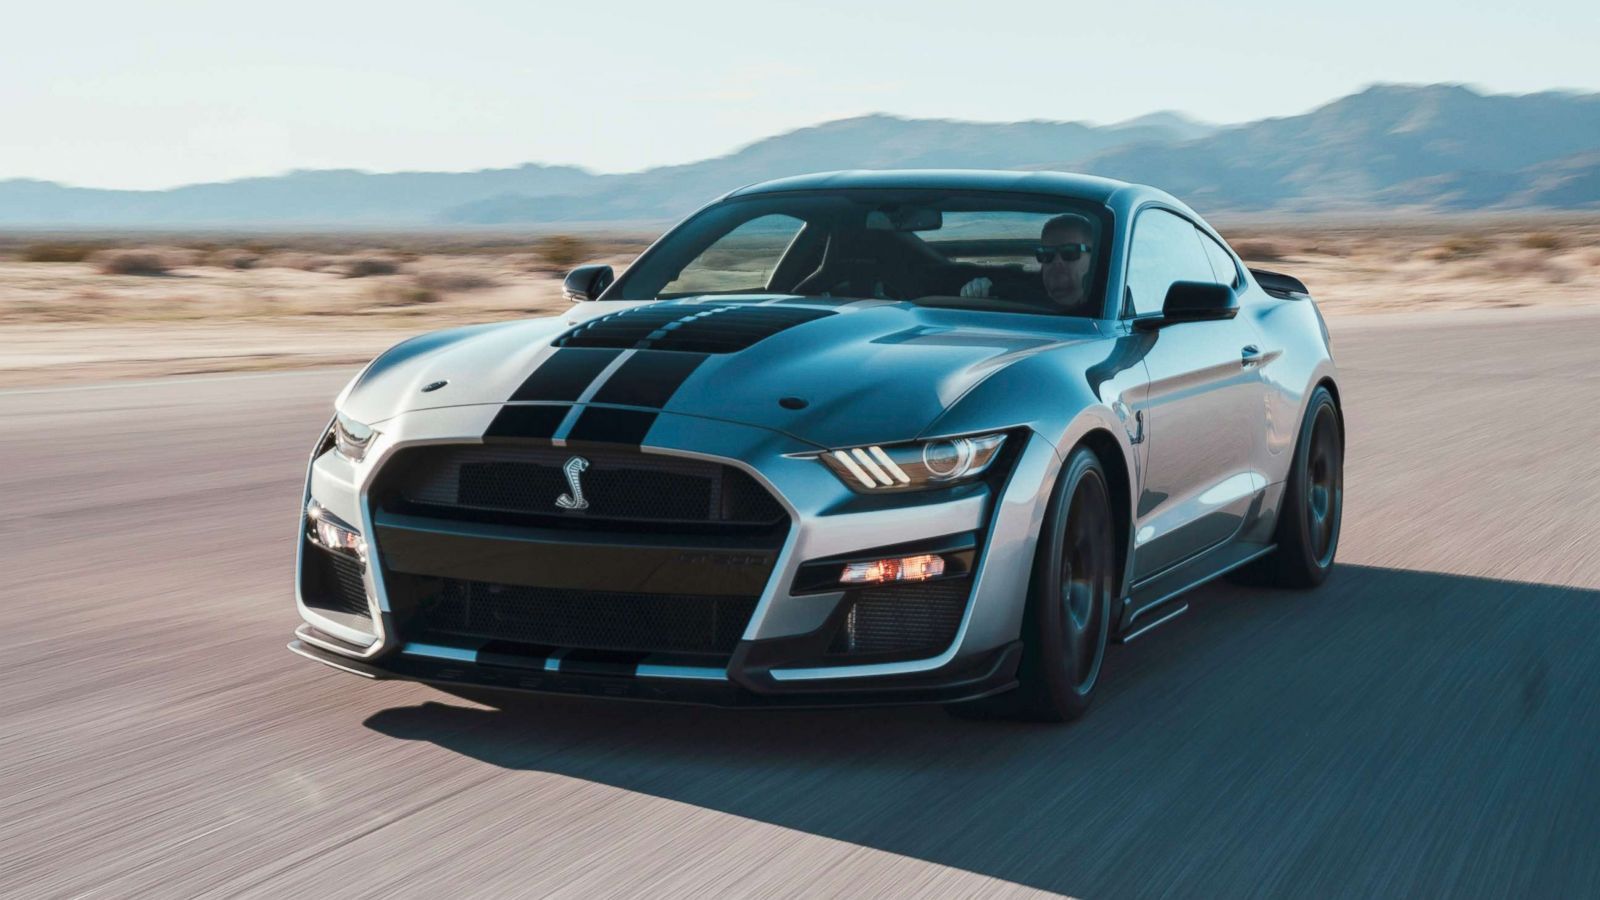 Ford Debuts The 2020 Mustang Shelby GT Its Most Powerful Street Legal Car, At Detroit Auto Show